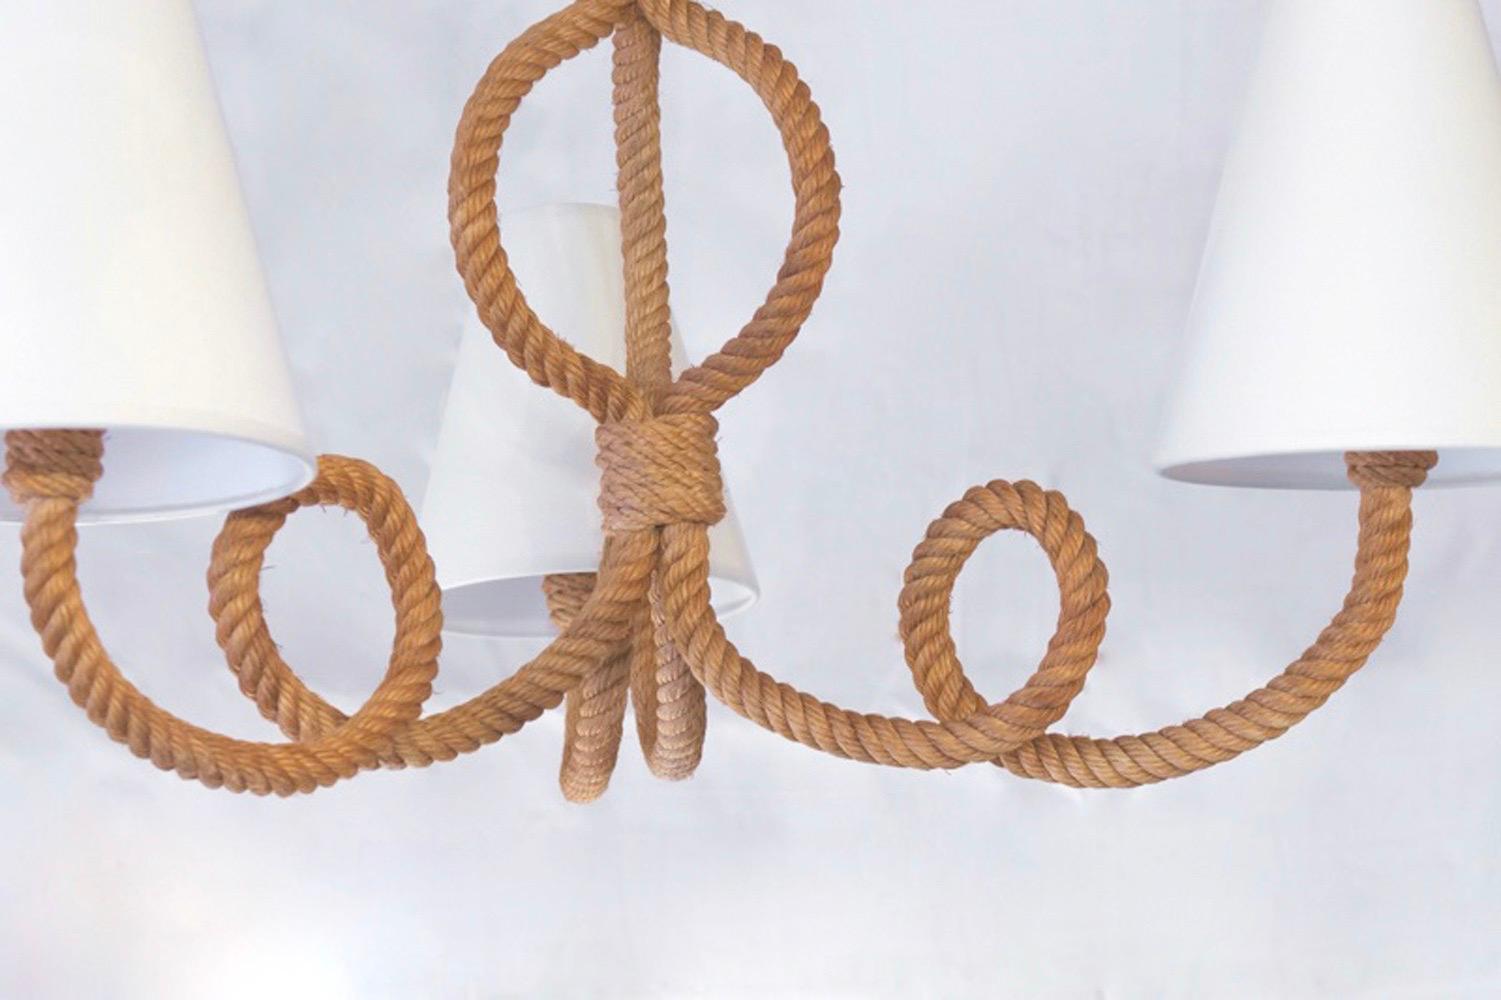 1950s Audoux & Minet rope chandelier
The structure of the chandelier includes three curved arms woven together to form the central arm of the chandelier. Off-white cotton shades matched to the originals. Four-light bulbs.

Adrien Audoux and Frida